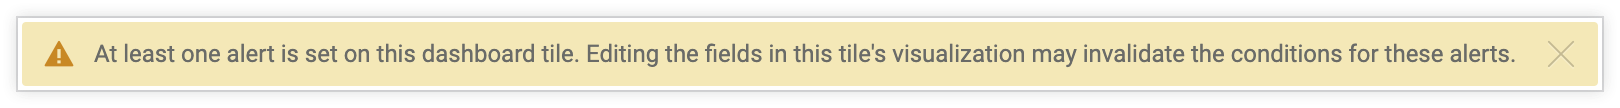 Looker displays the warning that editing may affect any alerts on this tile.